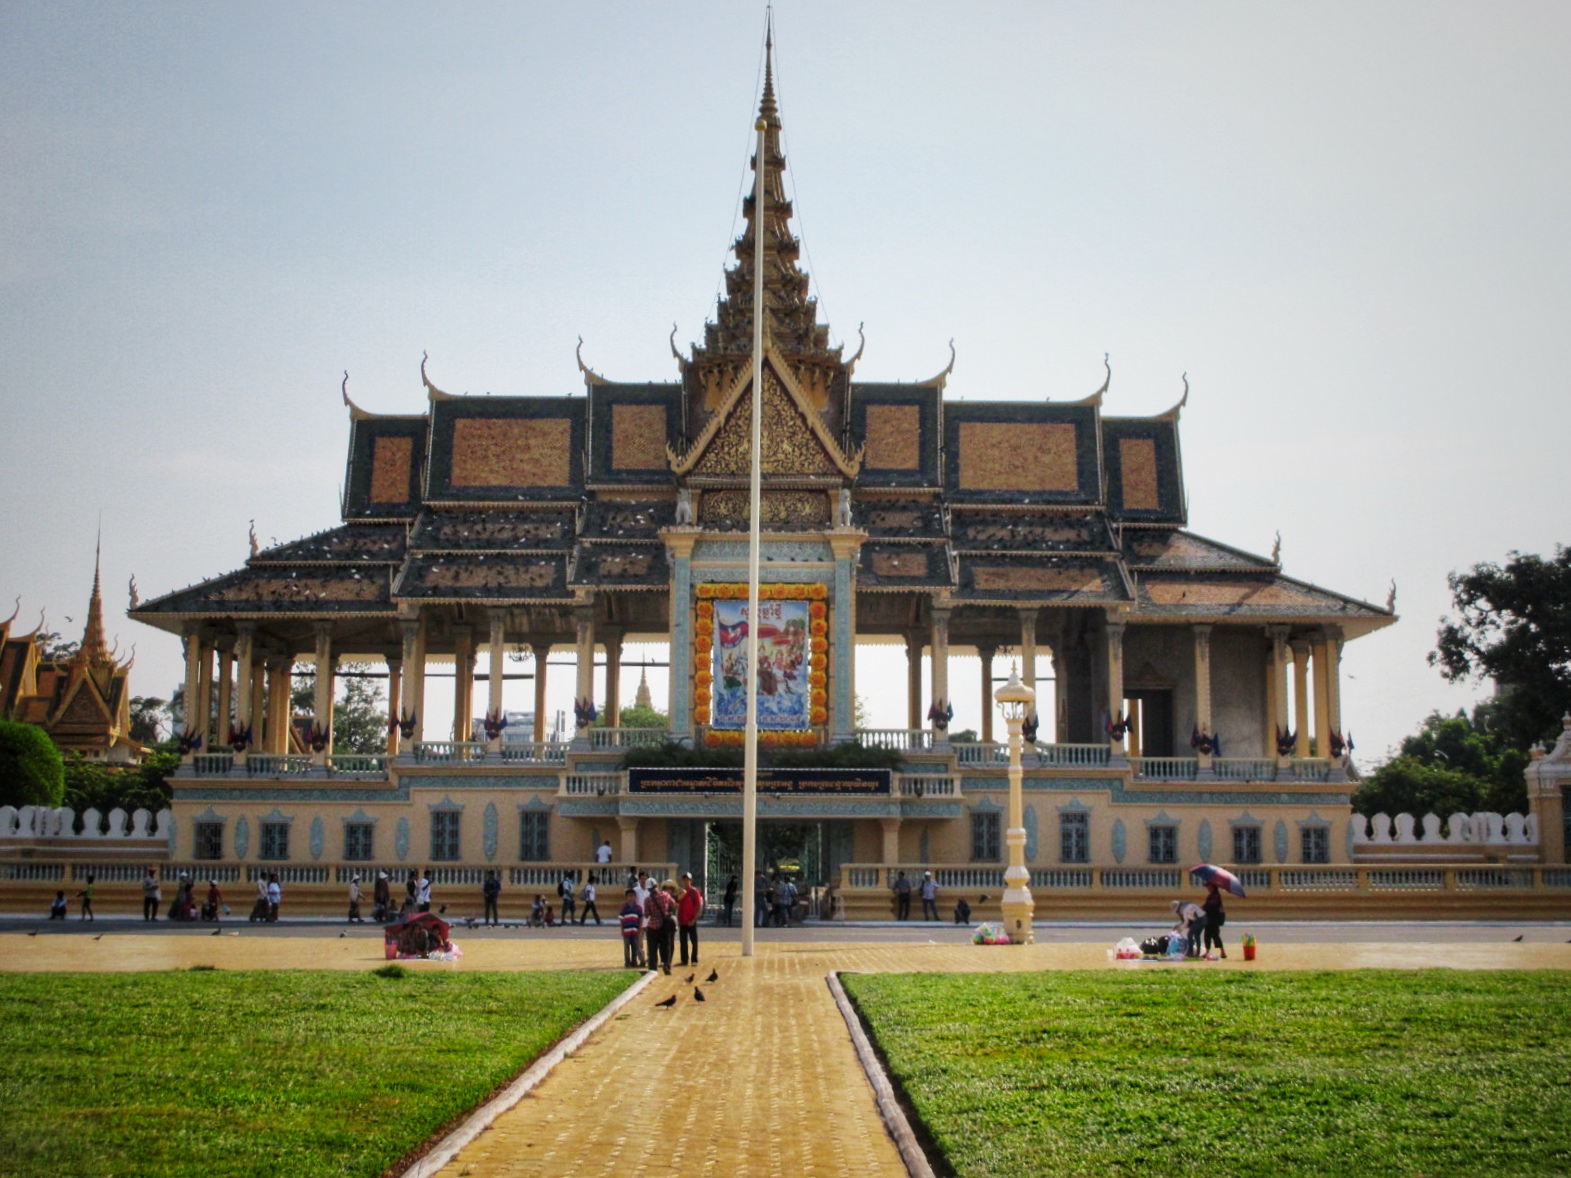 The Royal Palace is the outstanding example of rich and distinctive Khmer architecture